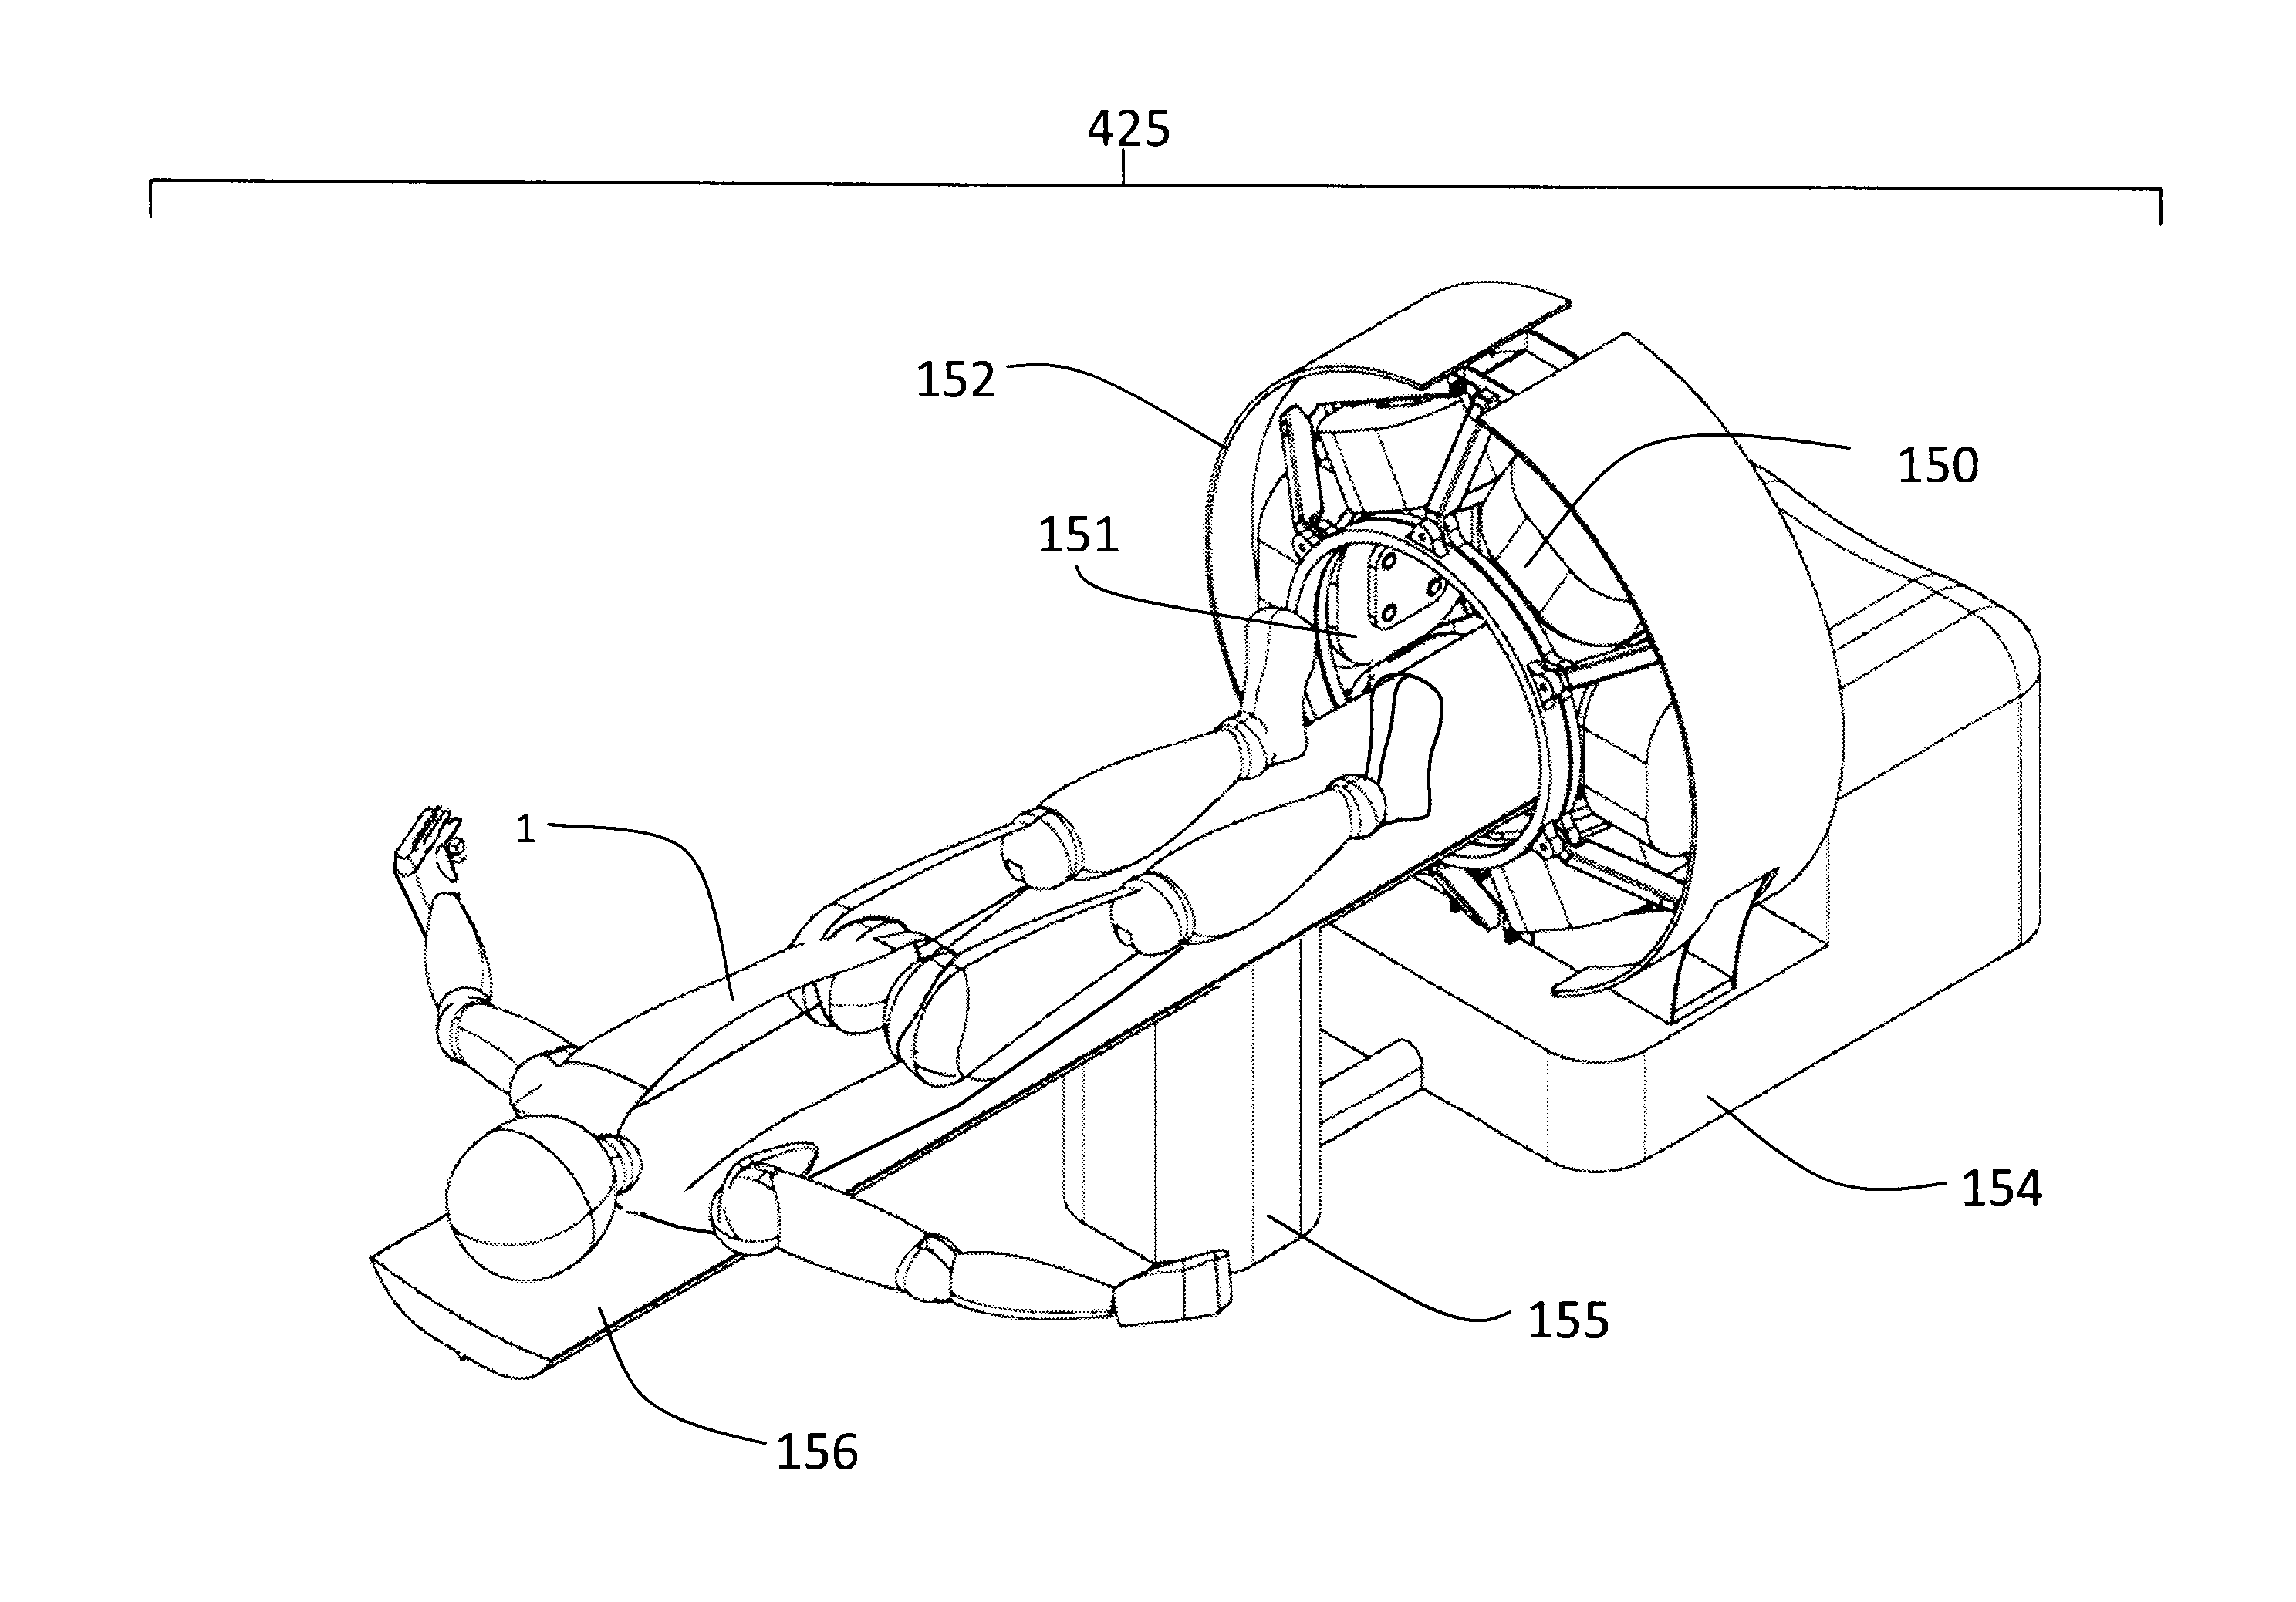 Diagnostic and therapeutic magnetic propulsion capsule and method for using the same